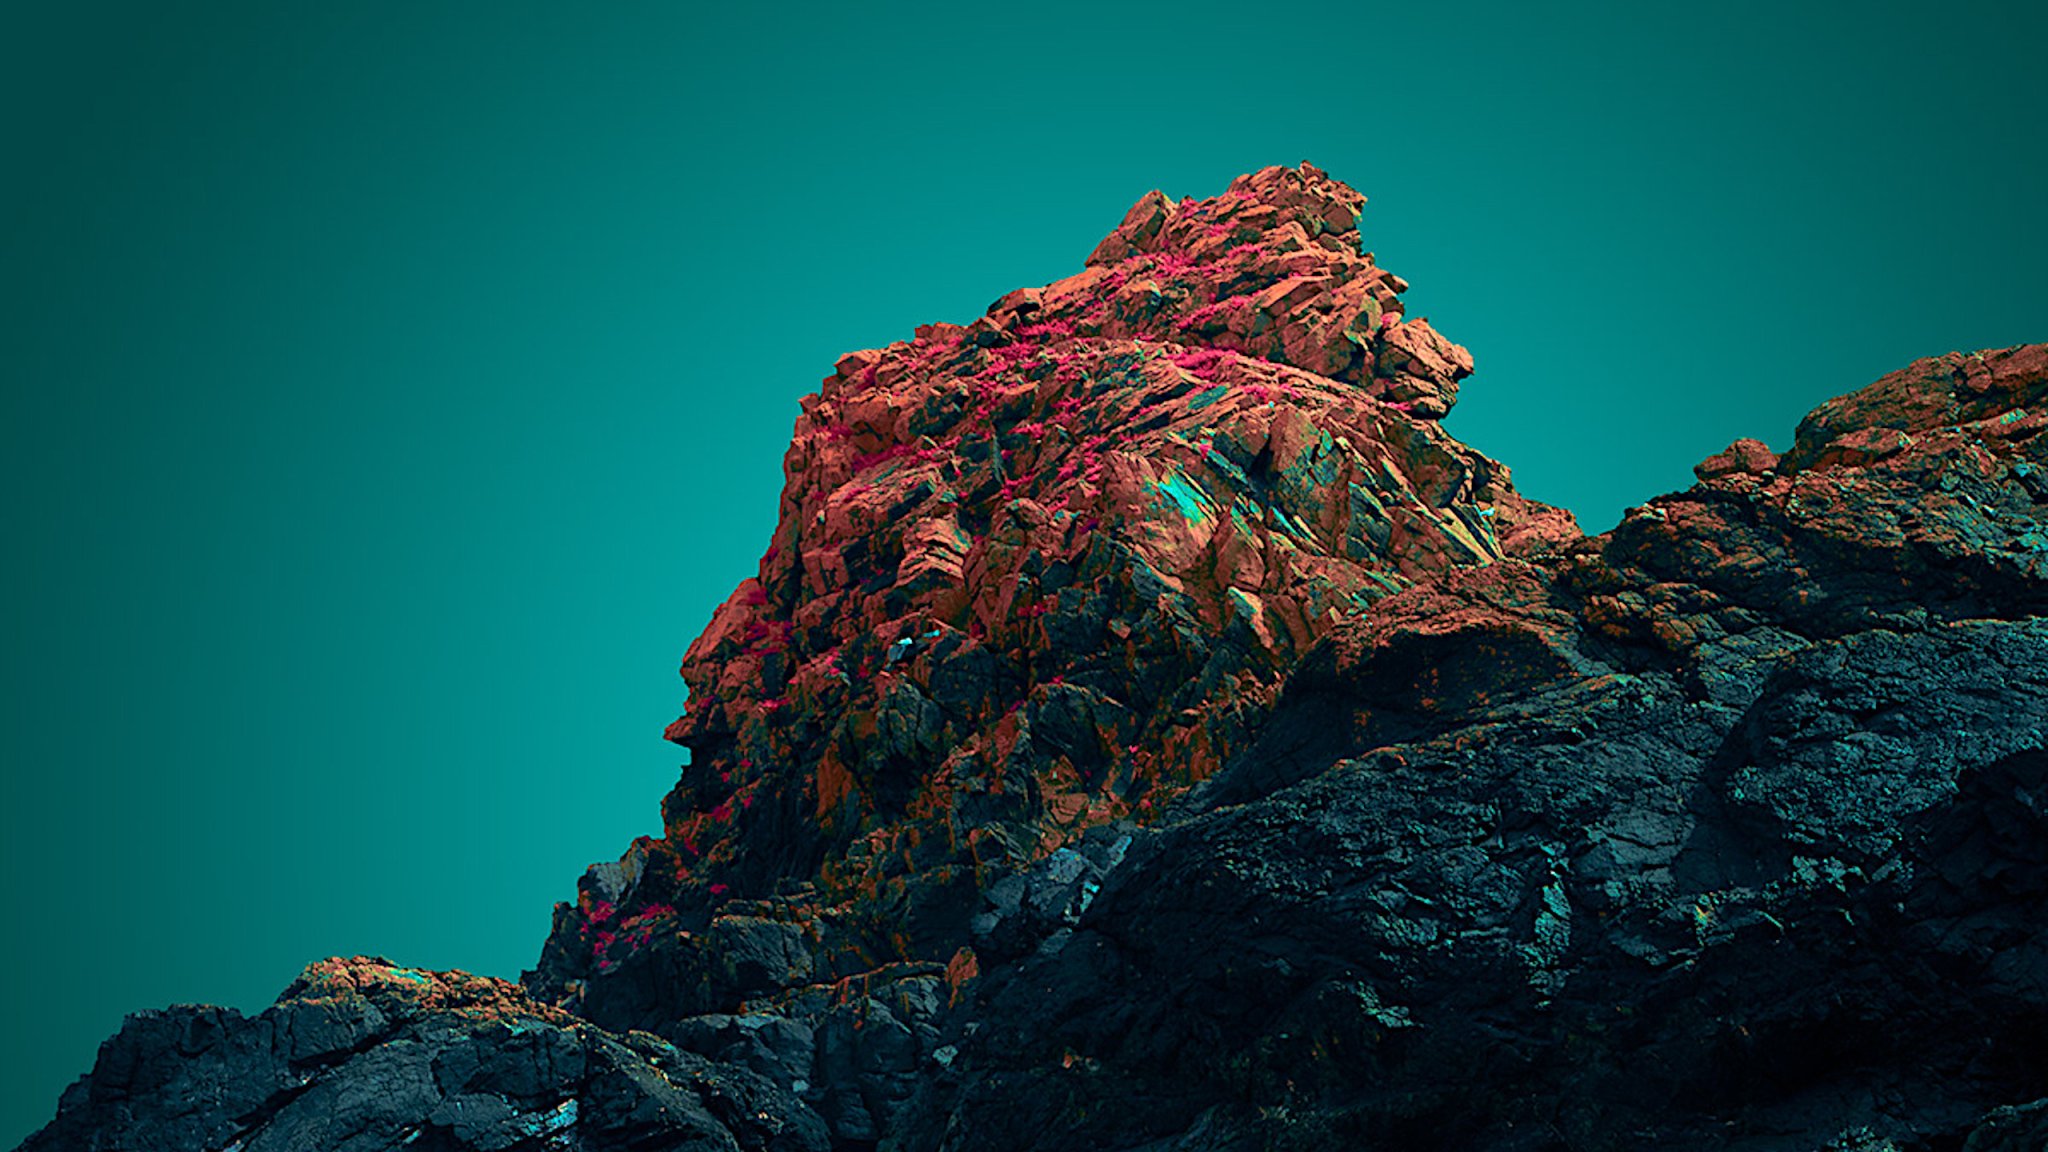 Reimagining Kynance Cove through color manipulation